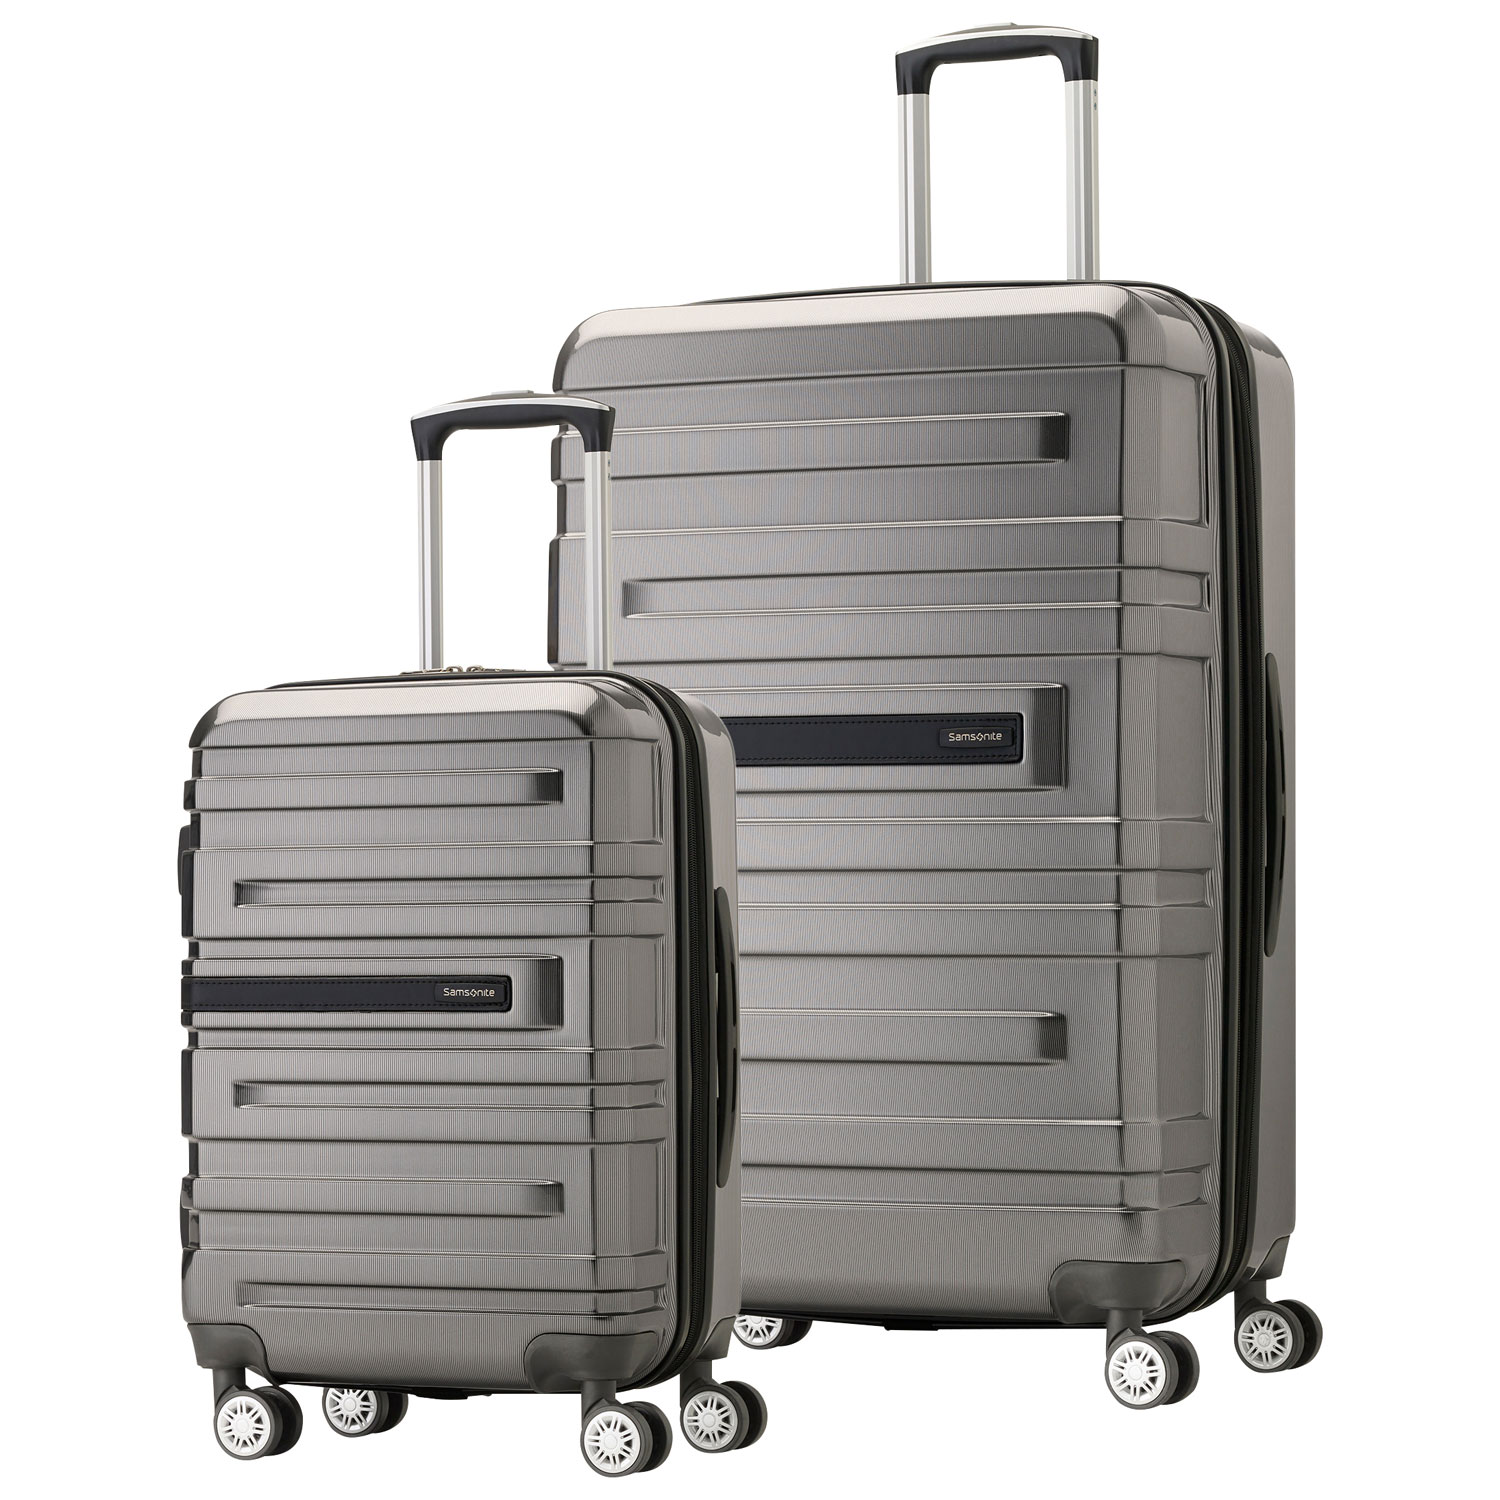 Samsonite McGrath 2-Piece Hard Side Expandable Luggage Set - Silver - Only at Best Buy